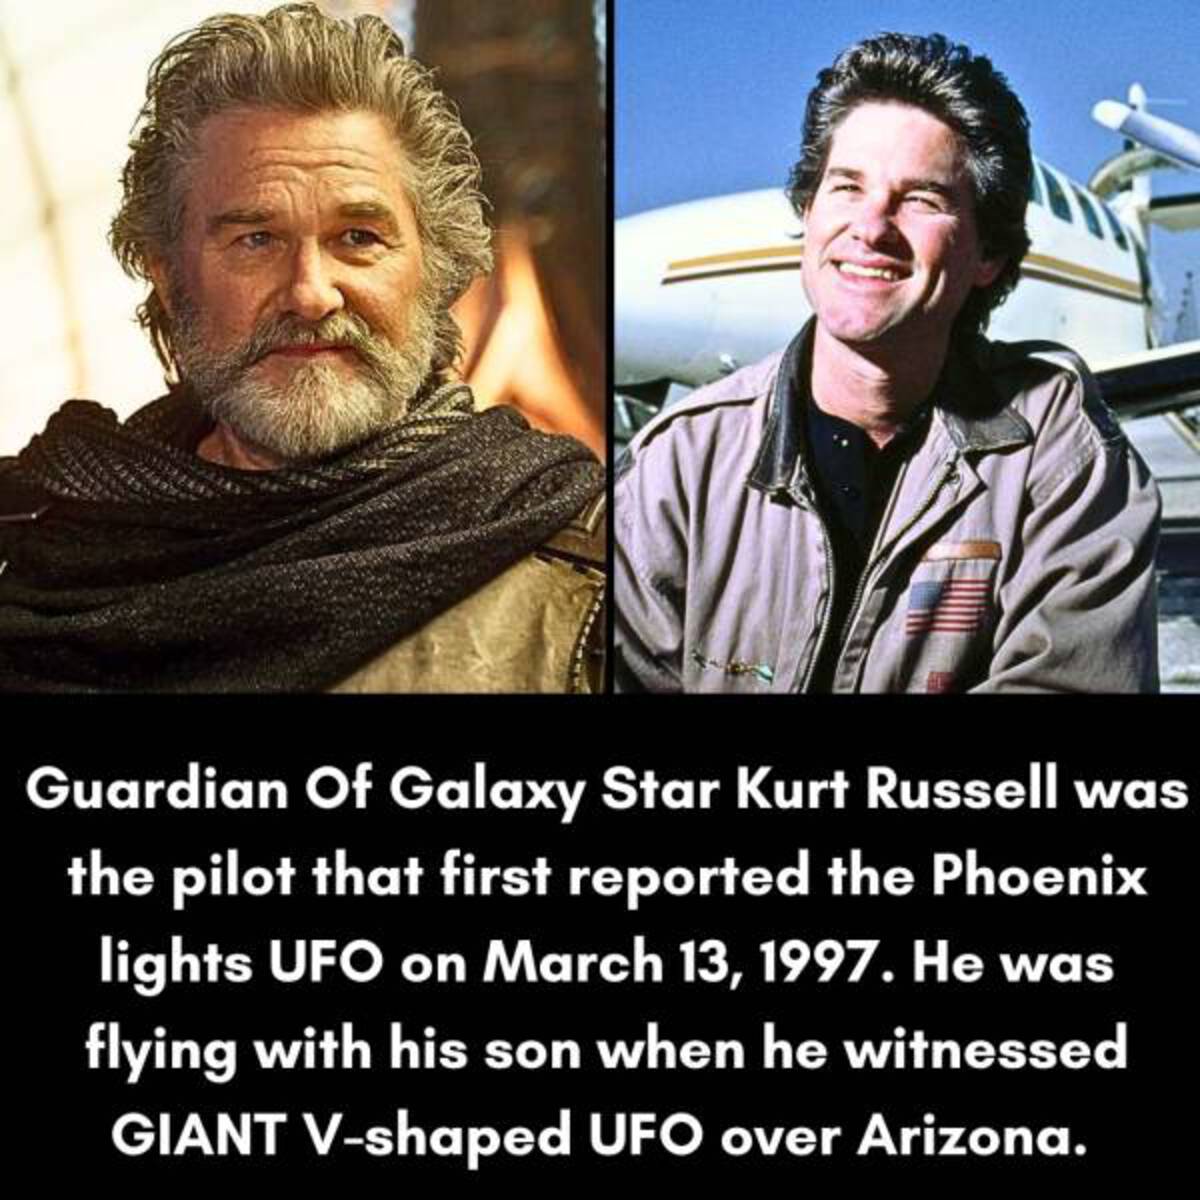 Guardian Of Galaxy Star Kurt Russell was the pilot that first reported the Phoenix lights Ufo on . He was flying with his son when he witnessed Giant Vshaped Ufo over Arizona.